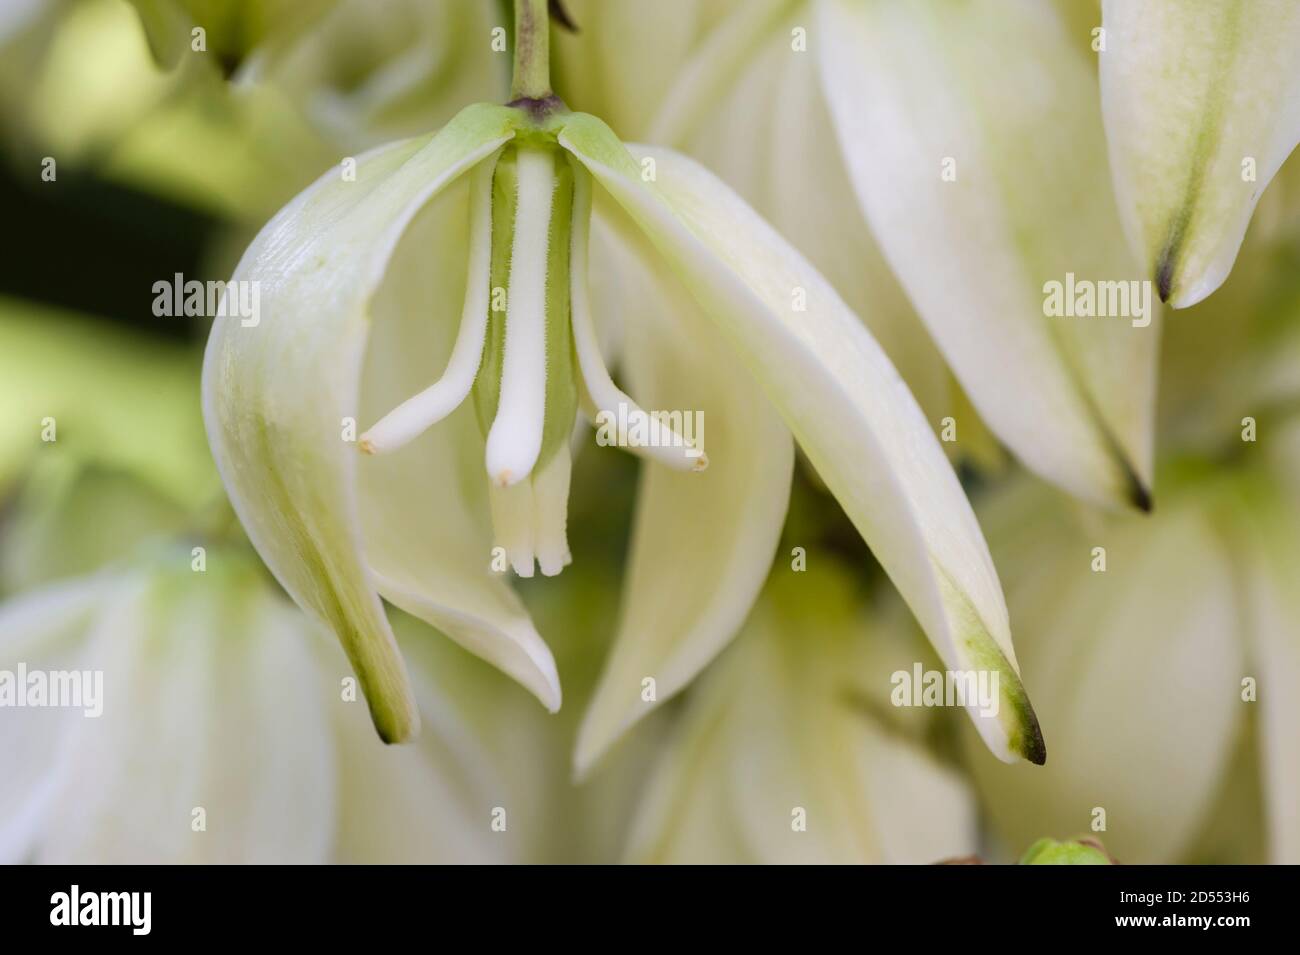 Detail of inside of the Yucca plant flower Stock Photo